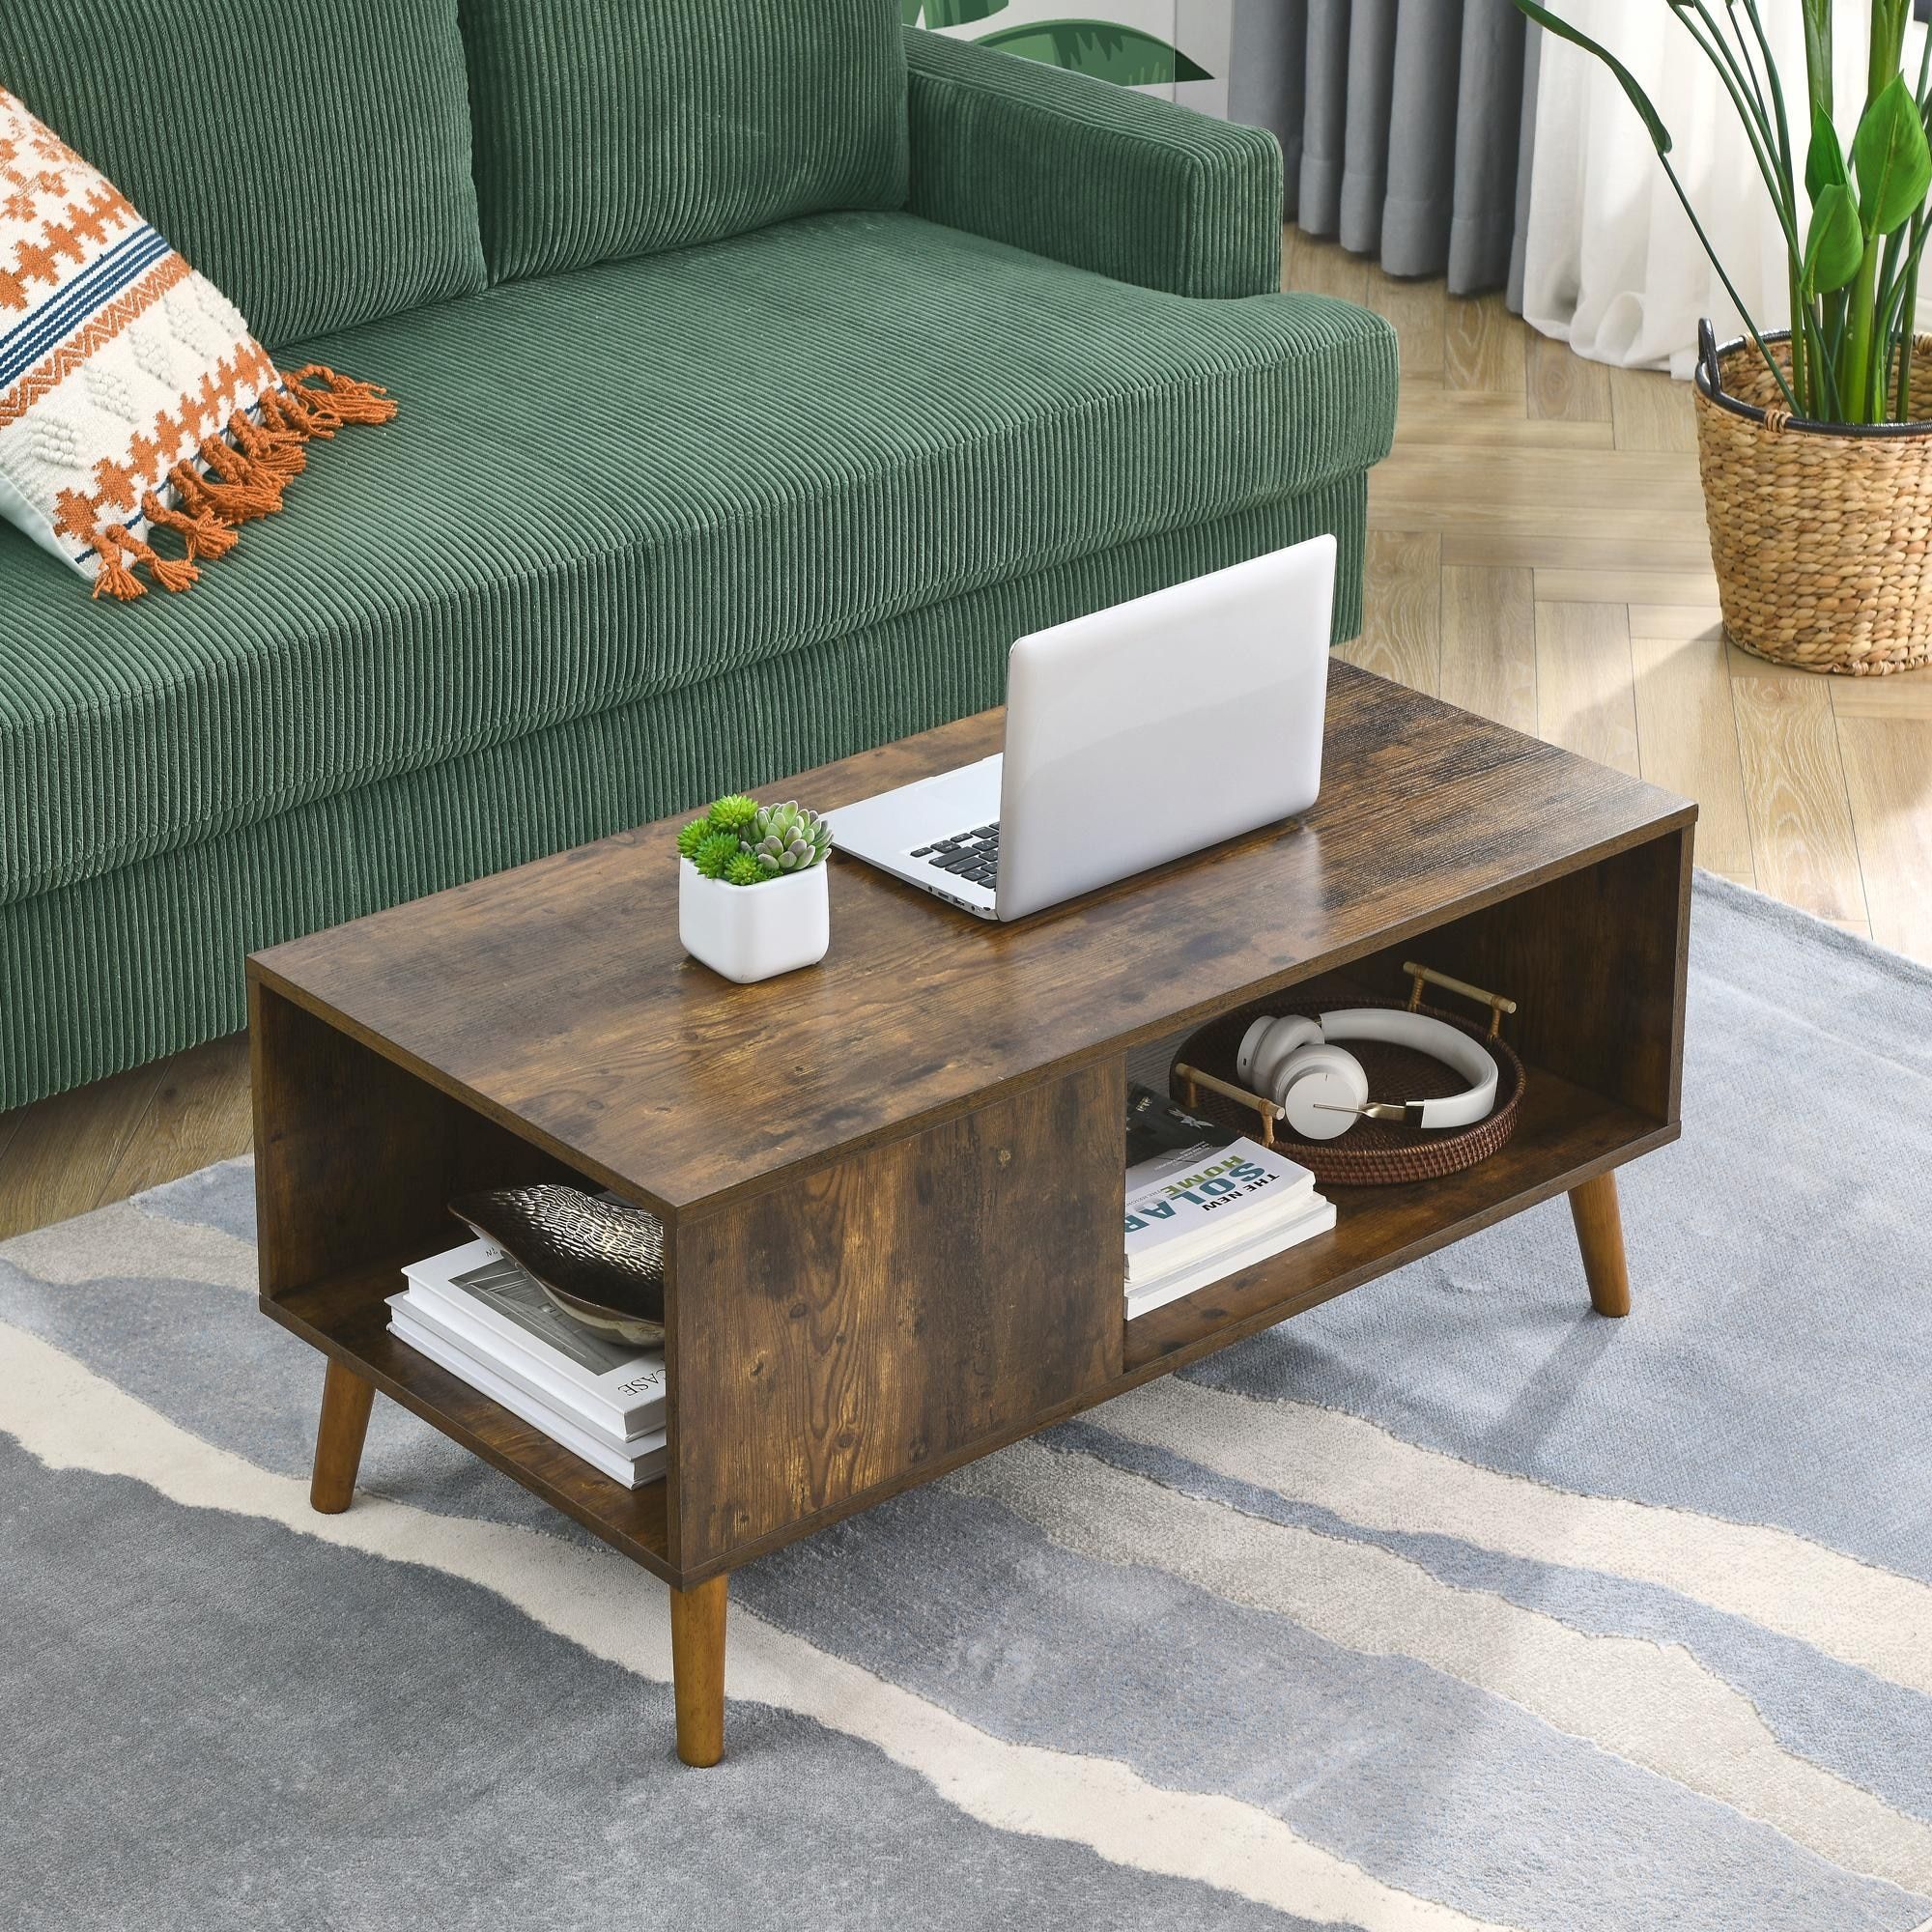 Stylish Coffee Table With Open Storage Shelf For Living Room Decor – On  Sale – Bed Bath & Beyond – 38423210 Throughout Coffee Tables With Open Storage Shelves (View 4 of 15)